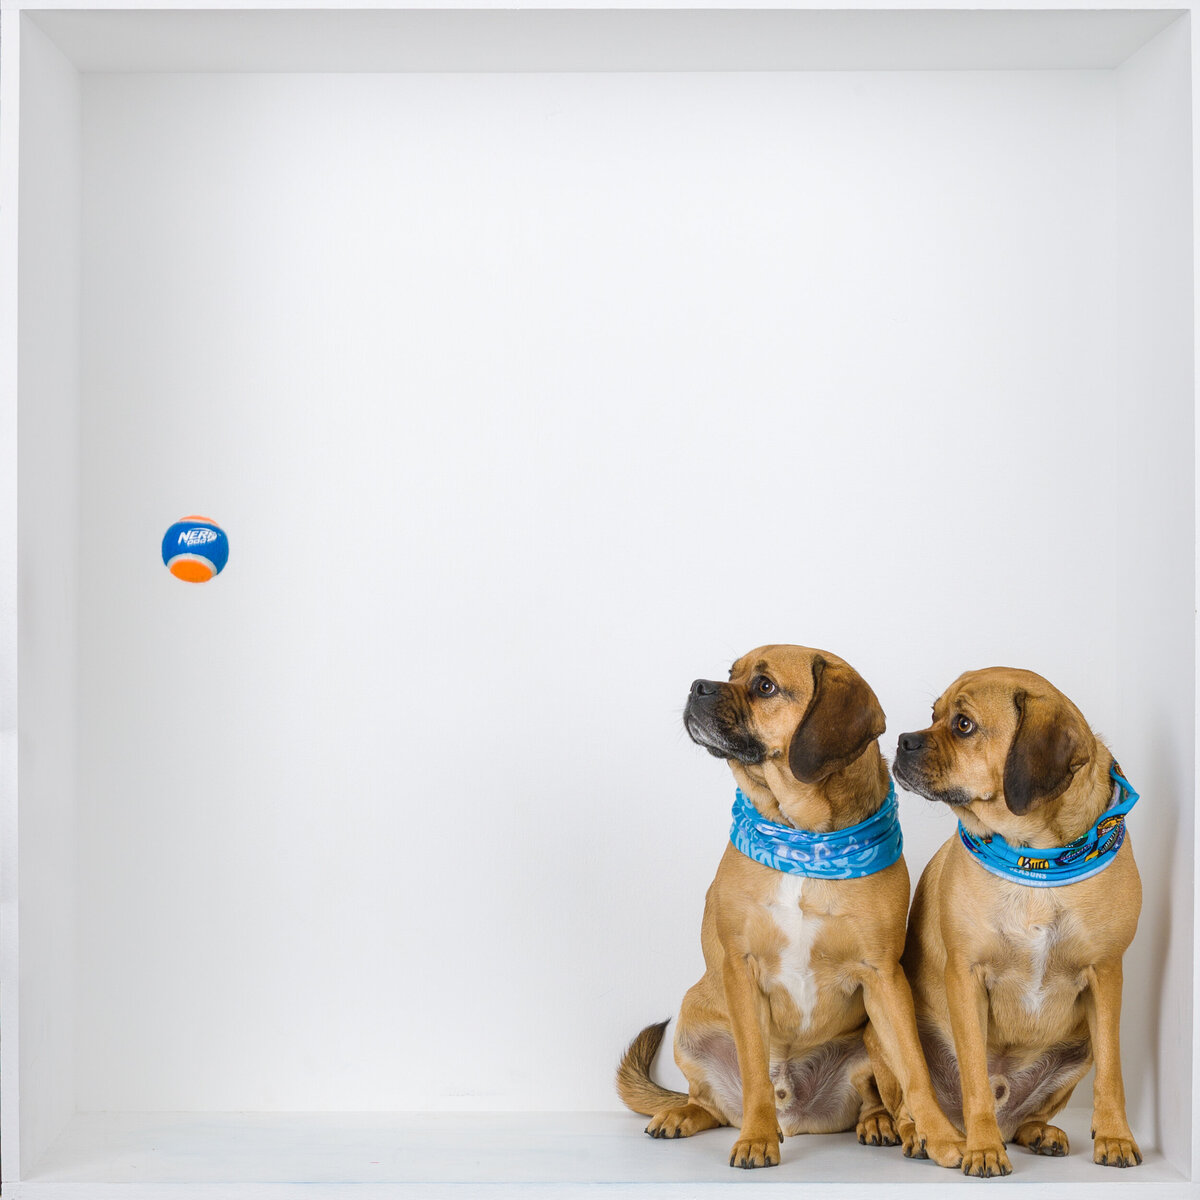 Two dogs in a white box looking at a tennis ball